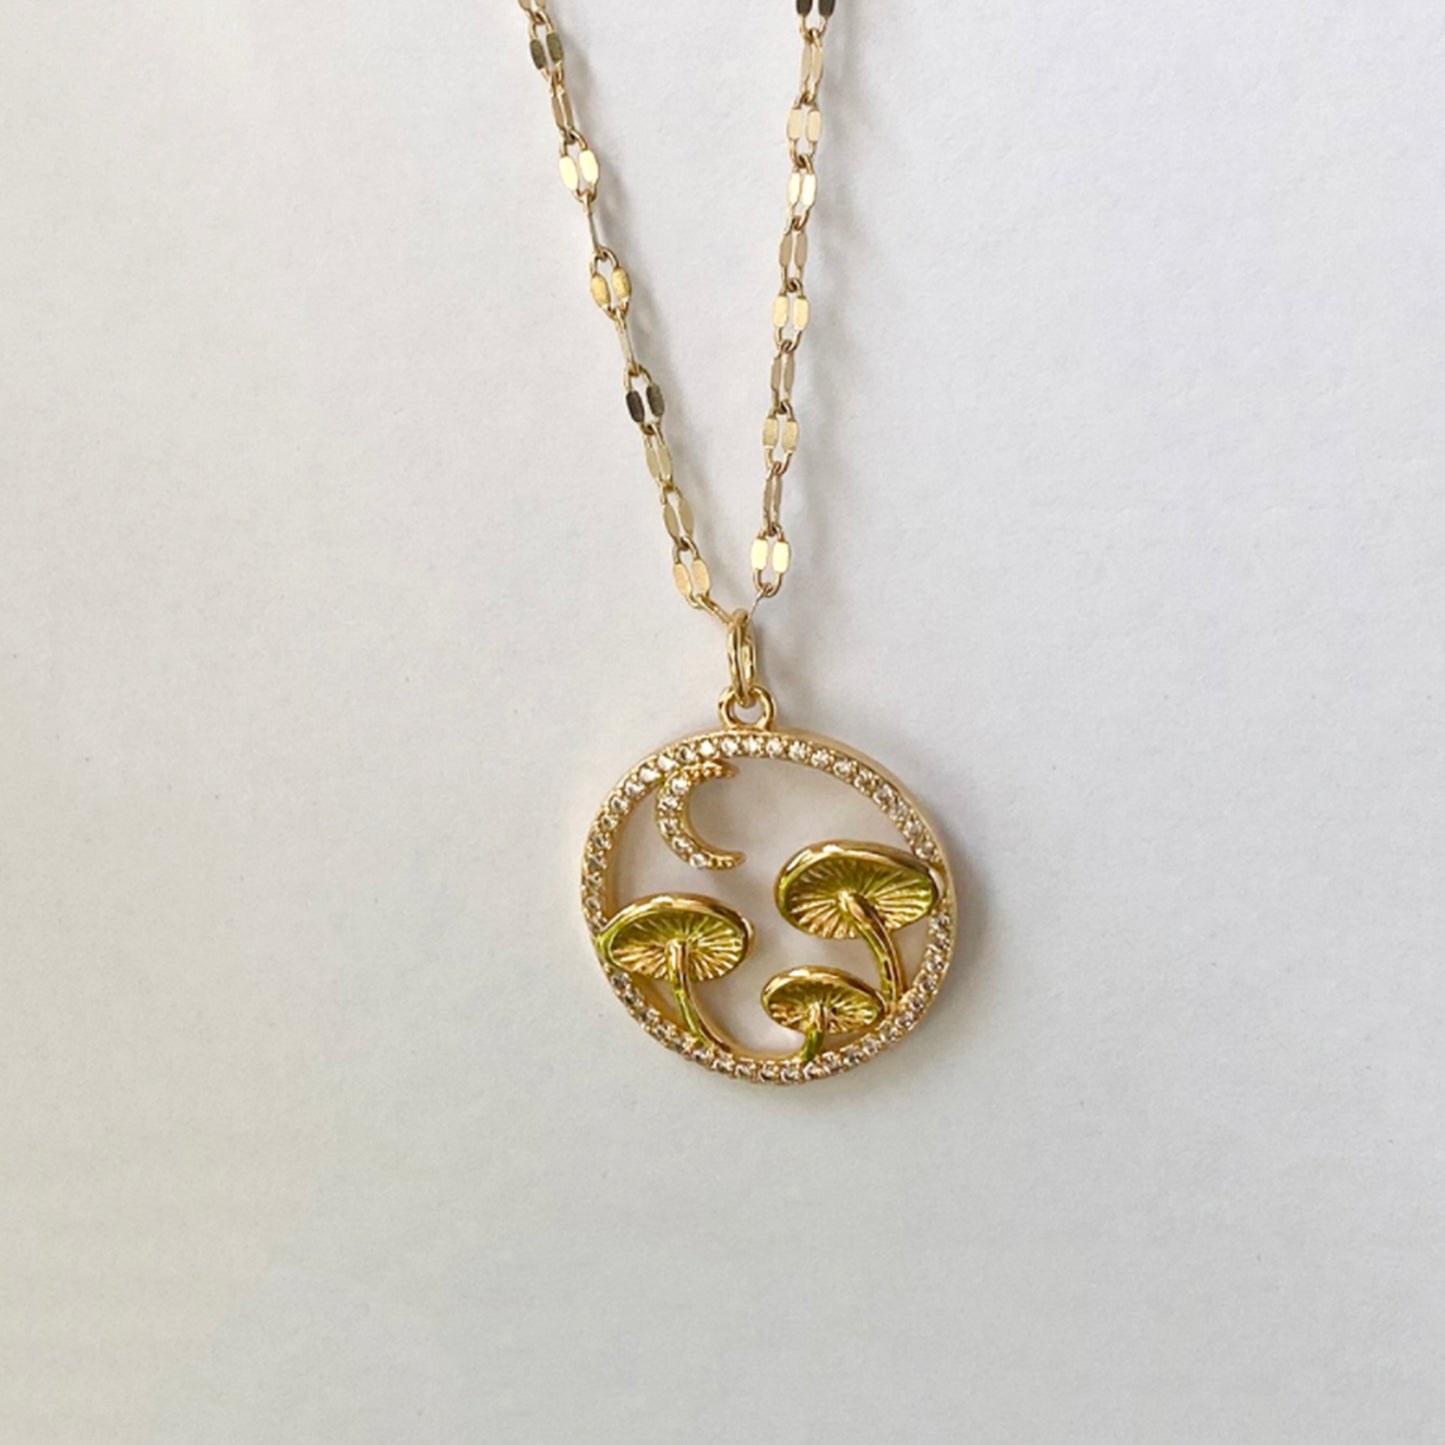 Mushroom Moon Necklace. An adorable little necklace featuring a mushroom & moon. This whimsical mushroom necklace is perfect to give as a gift or wear for yourself 